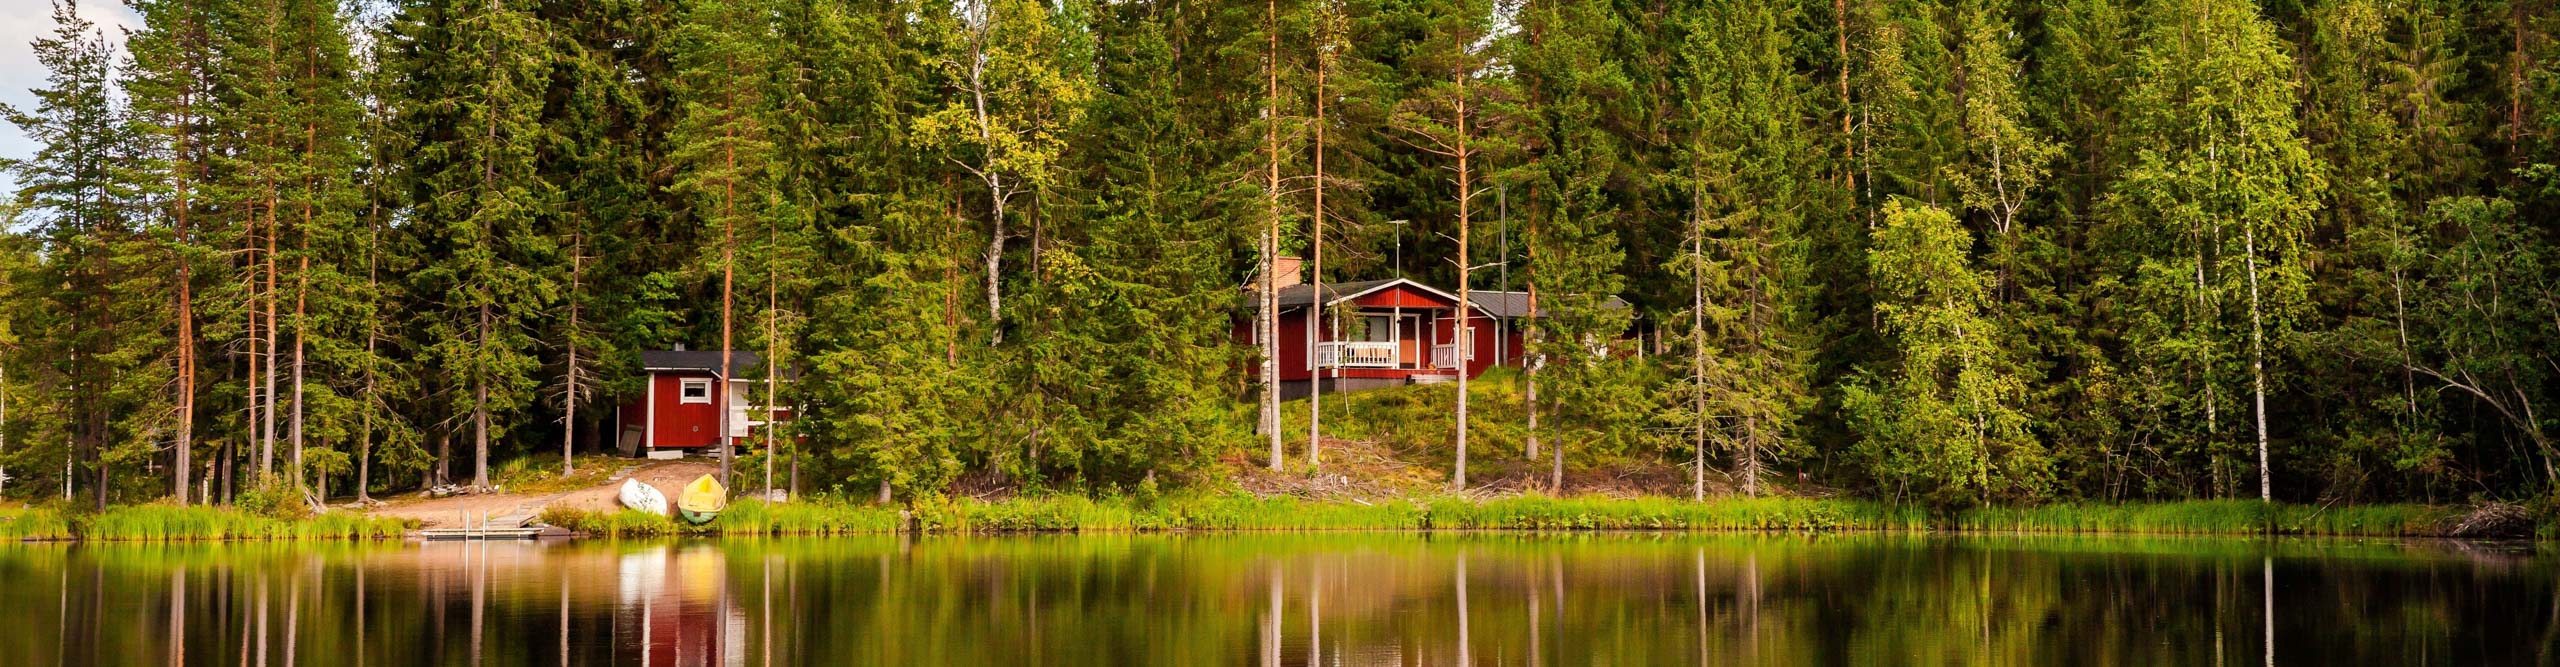 Red wooden cottage amongst the trees reflected in the lake in rural Finland